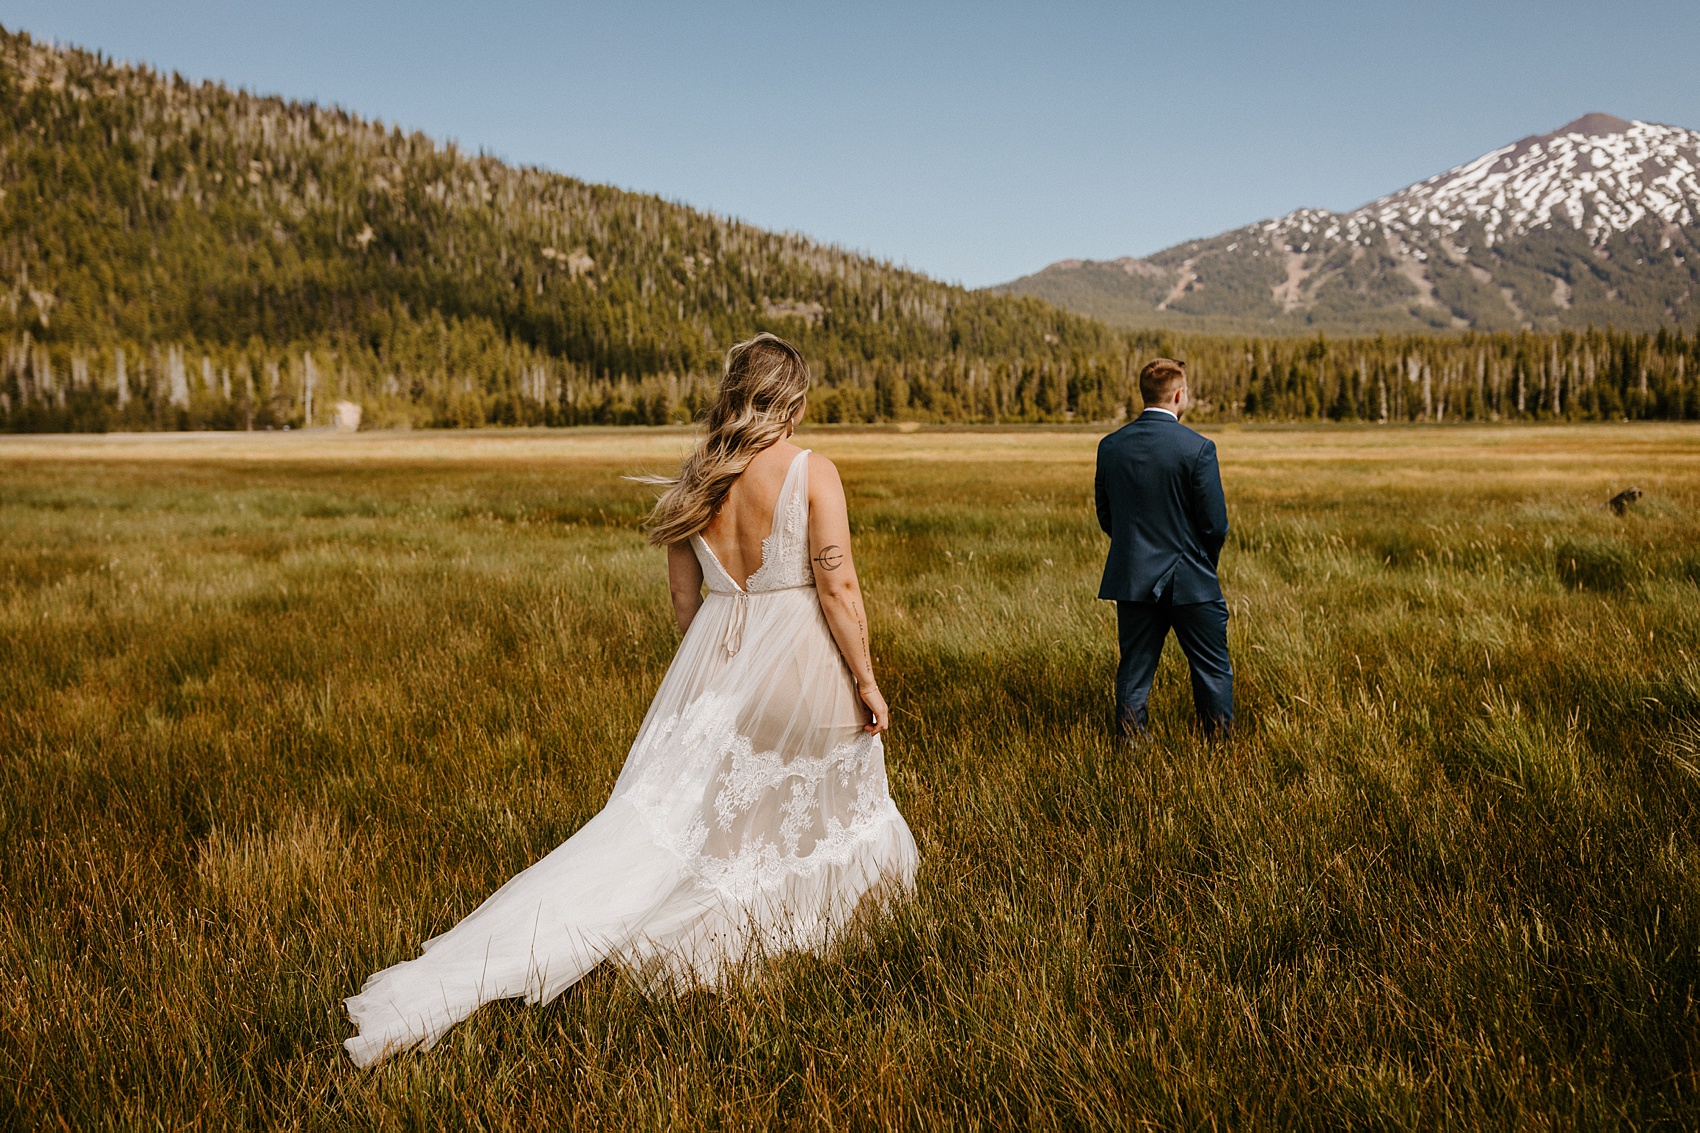 Meadow Elopement in the Mountains | Victoria Carlson Photography